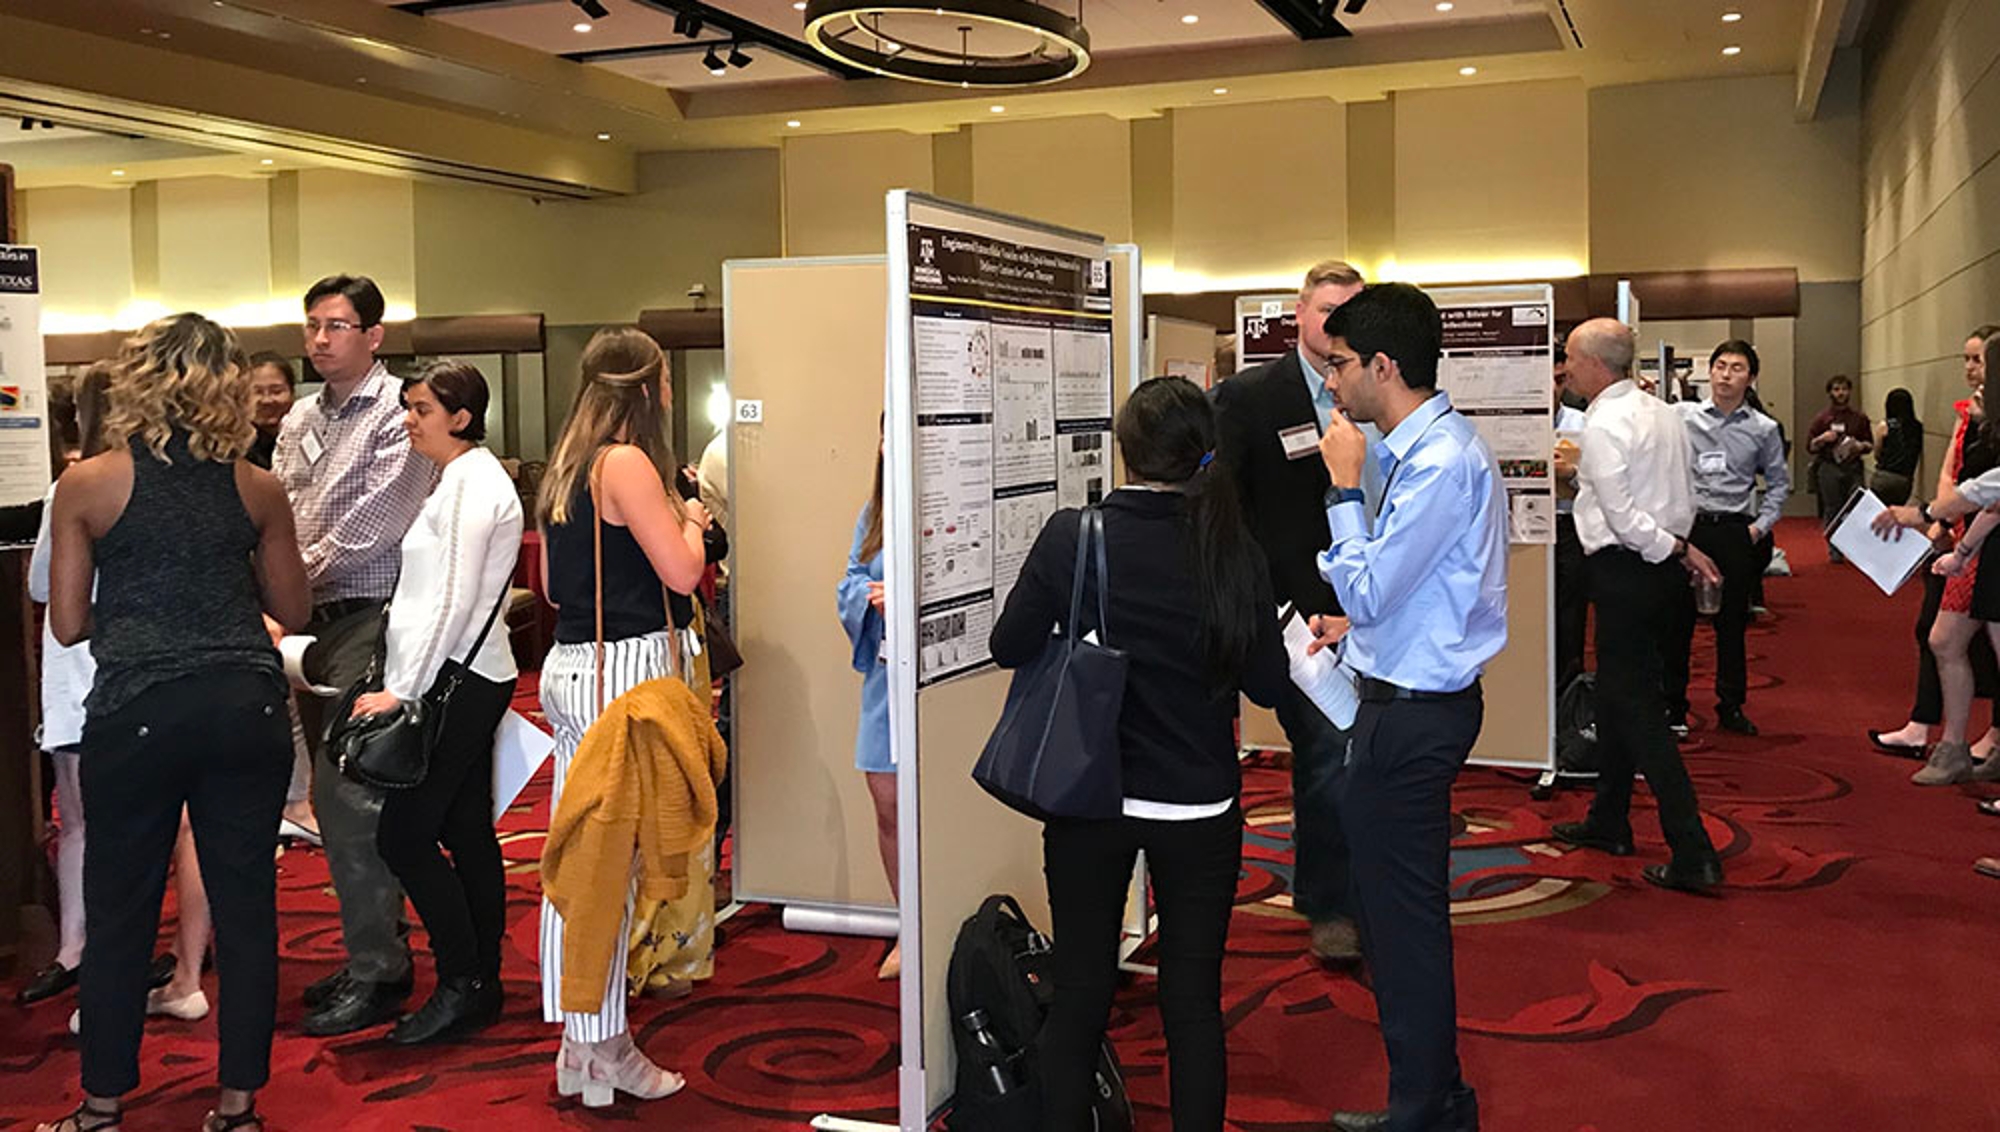 Attendees look over posters at the 2018 biomedical engineering Biomaterials Day.